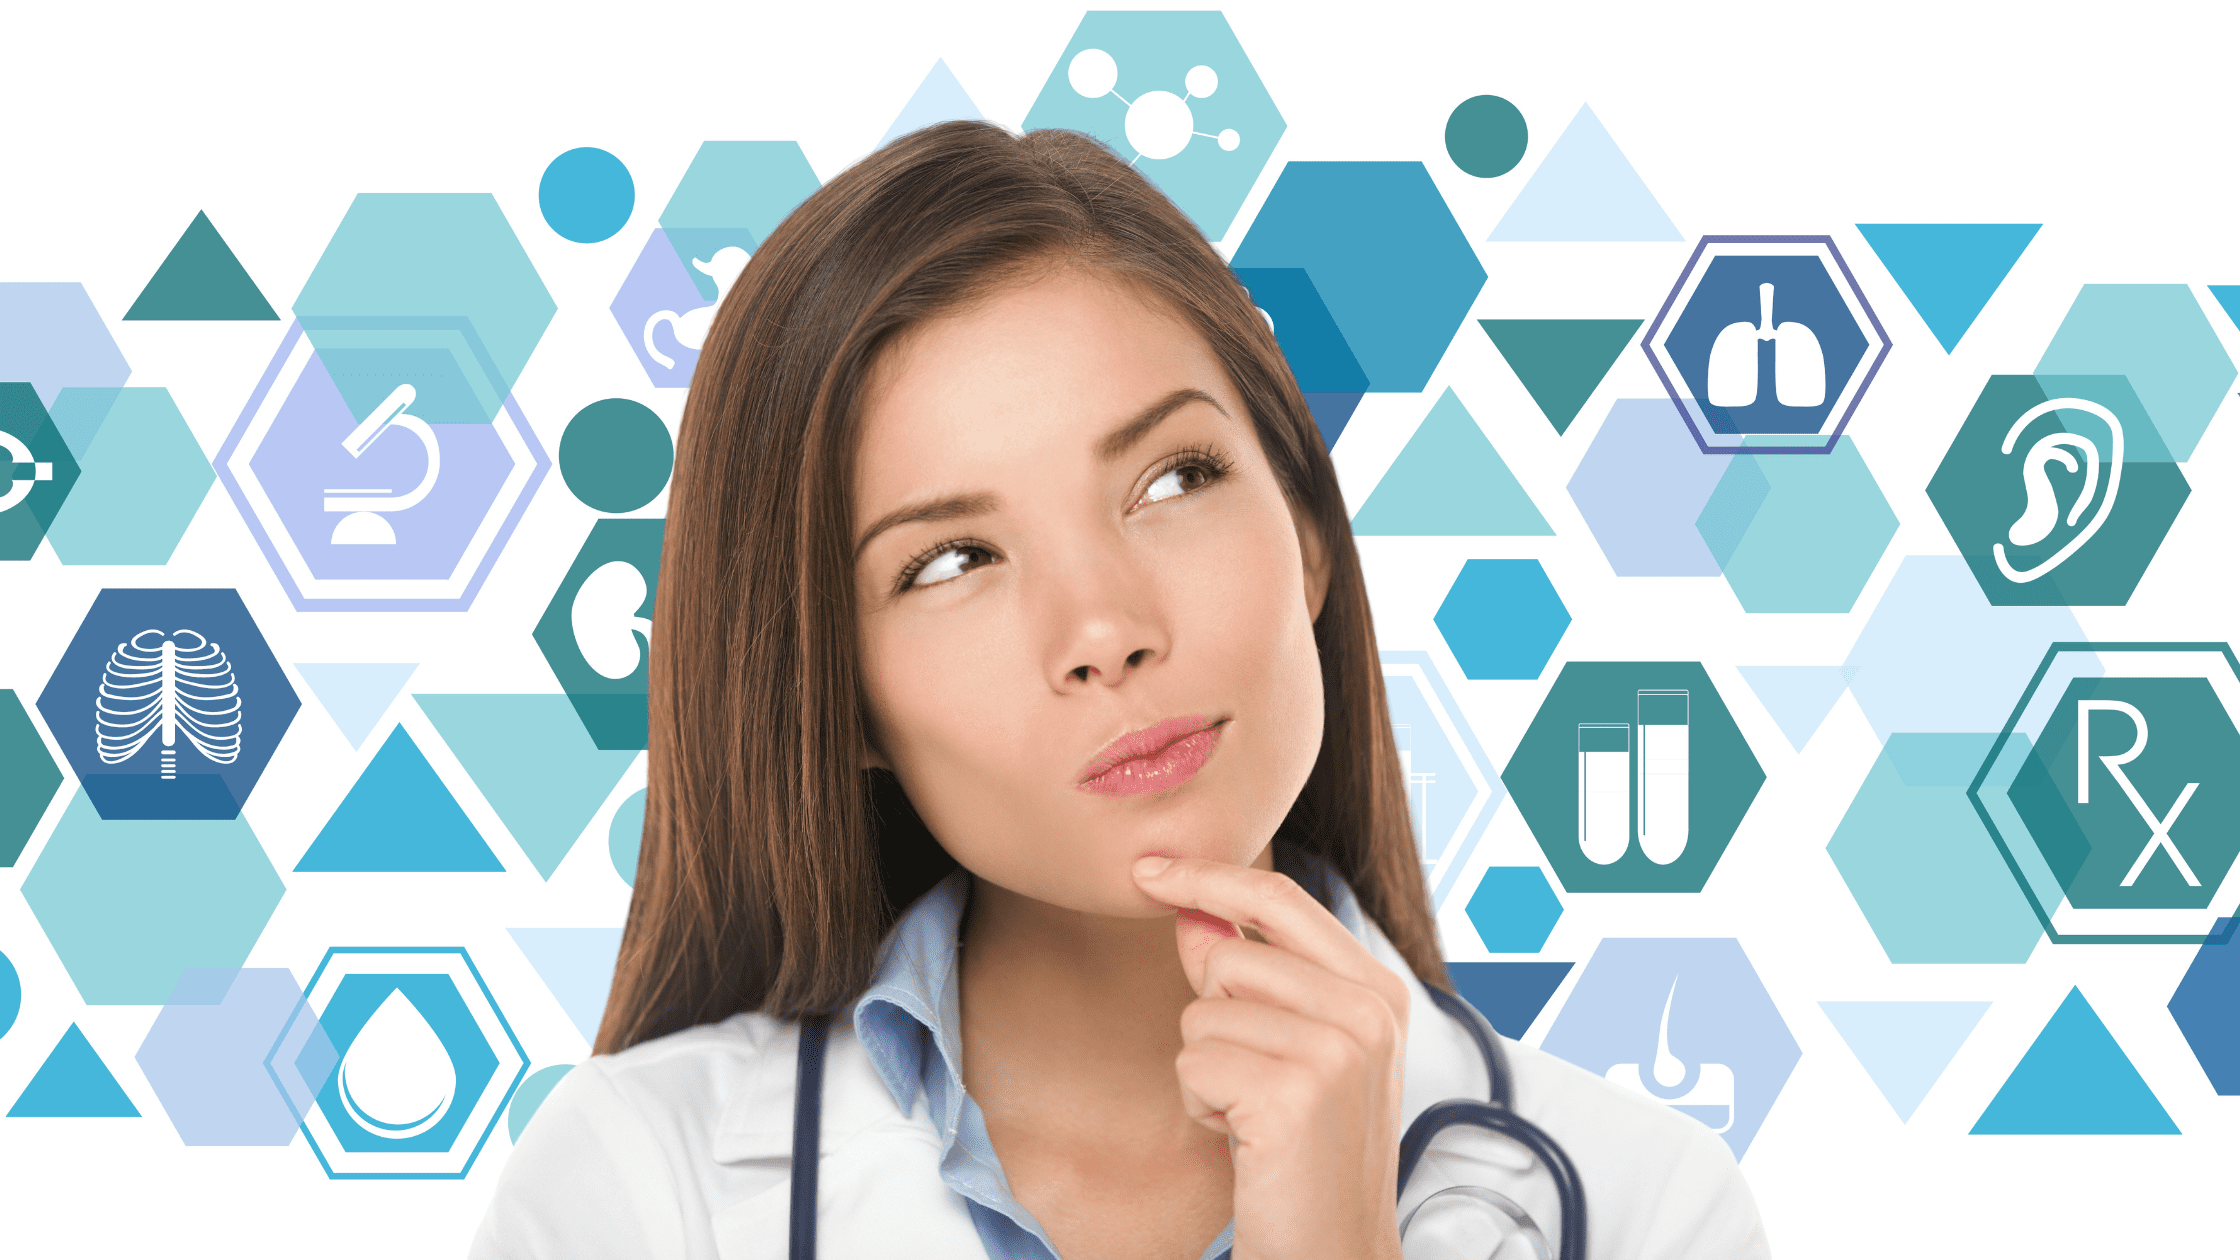 A medical school senior contemplating what specialties she should apply to for residency, and whether she should opt for dual applying or for combined residency programs.